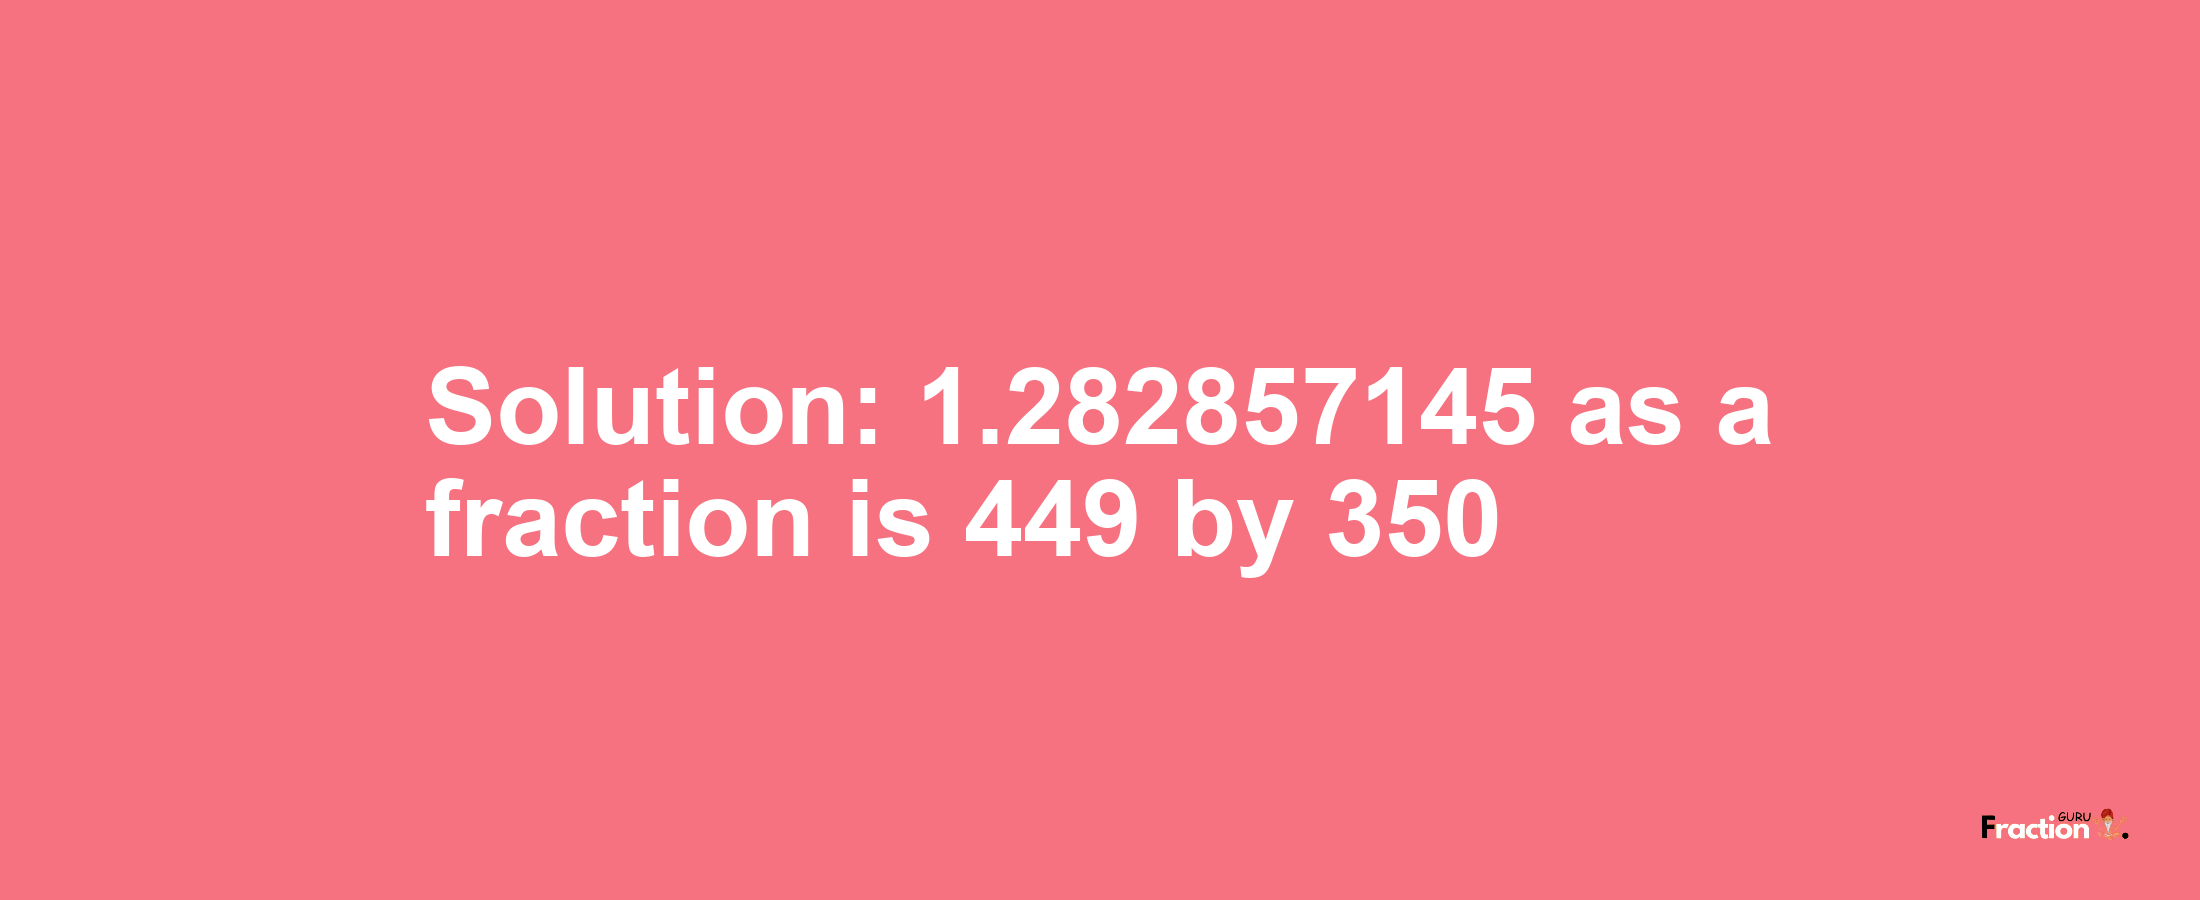 Solution:1.282857145 as a fraction is 449/350